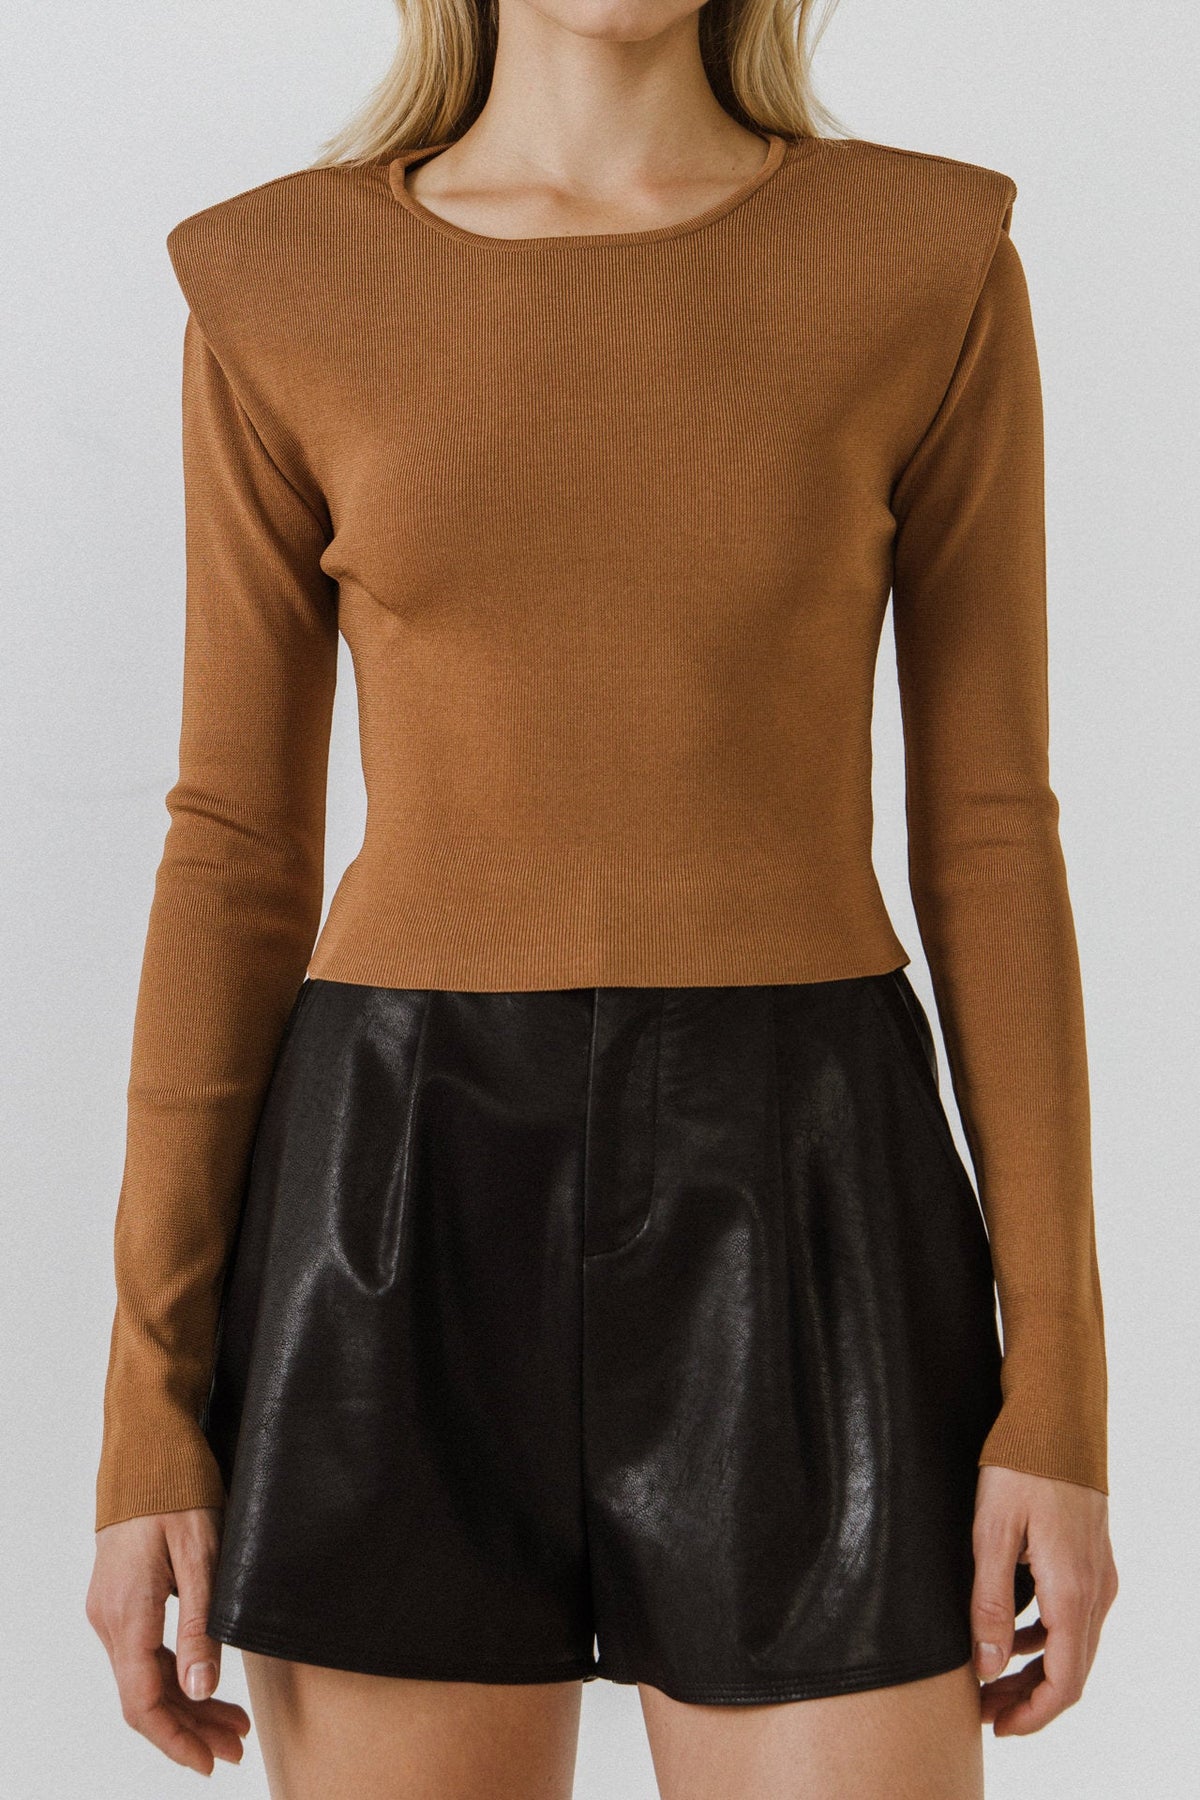 ENDLESS ROSE - Shoulder Pad Knit Top - SWEATERS & KNITS available at Objectrare